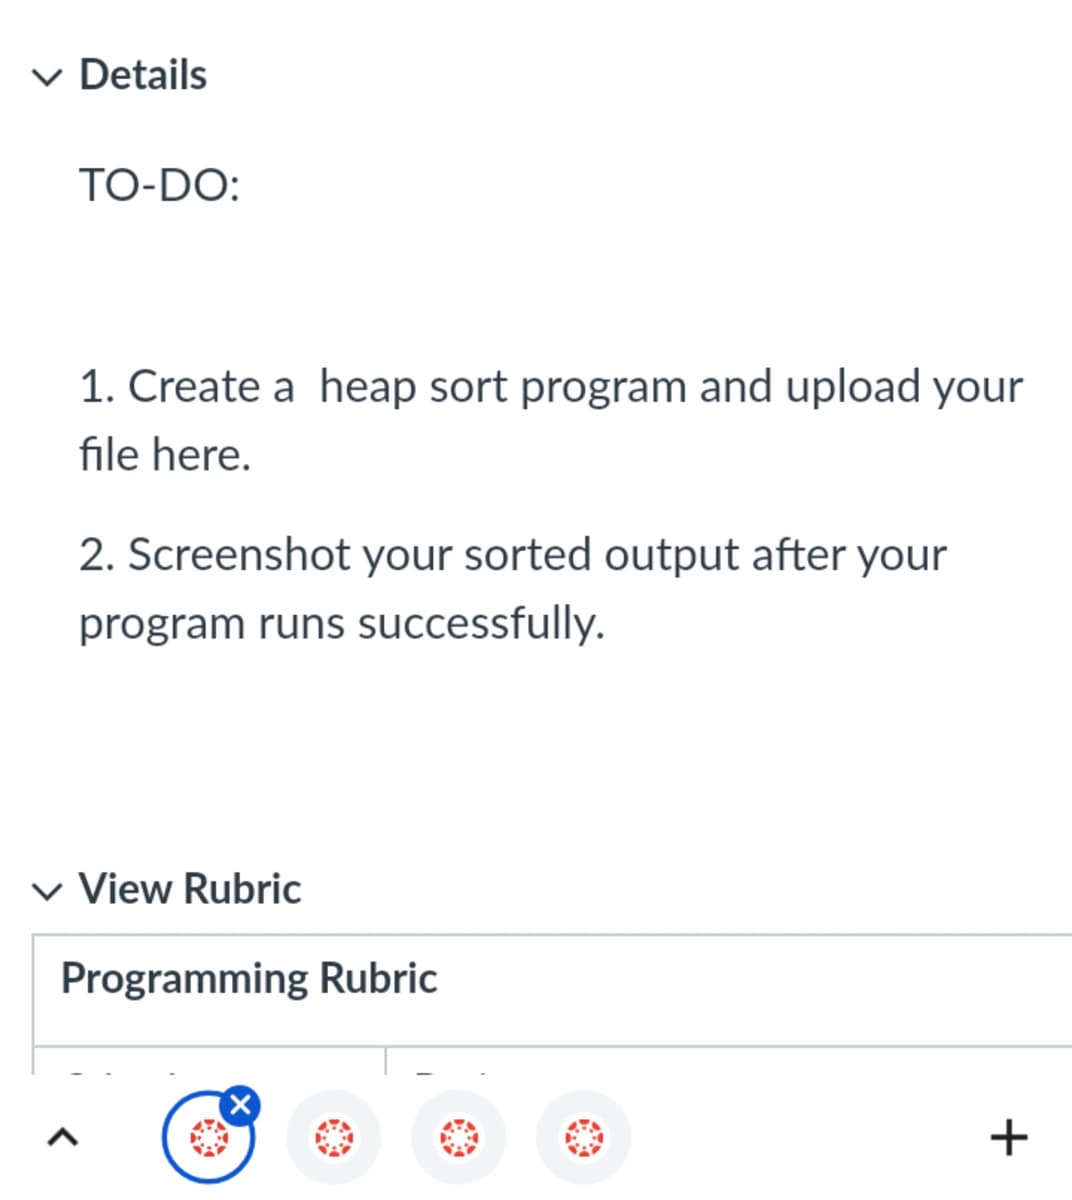 ✓ Details
TO-DO:
1. Create a heap sort program and upload your
file here.
2. Screenshot your sorted output after your
program runs successfully.
View Rubric
Programming Rubric
+